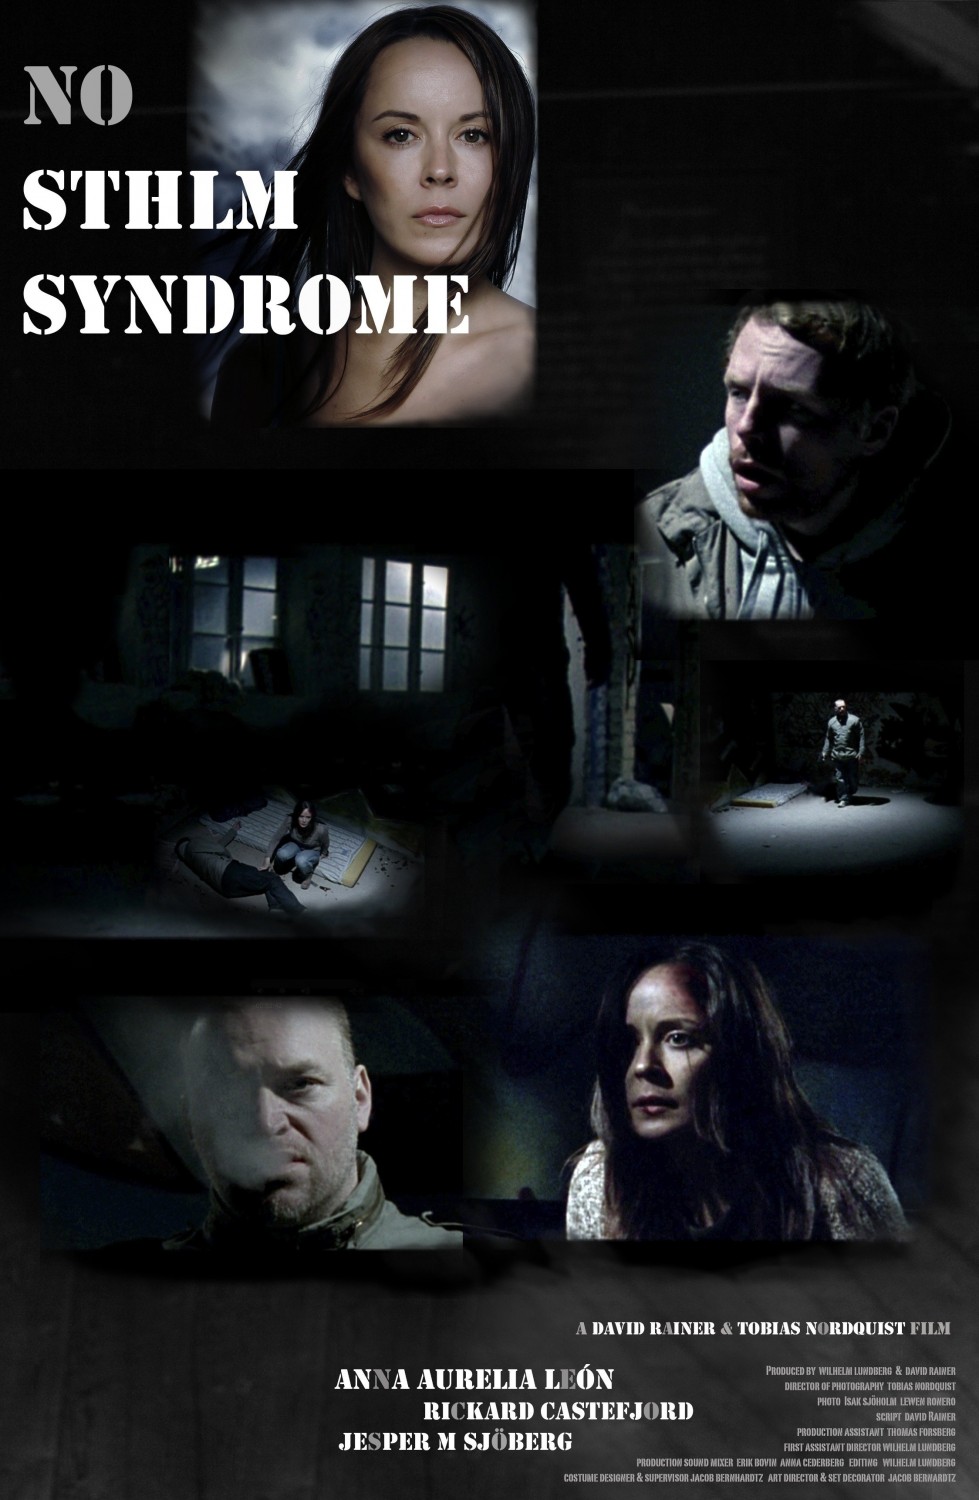 Extra Large Movie Poster Image for No Sthlm Syndrome